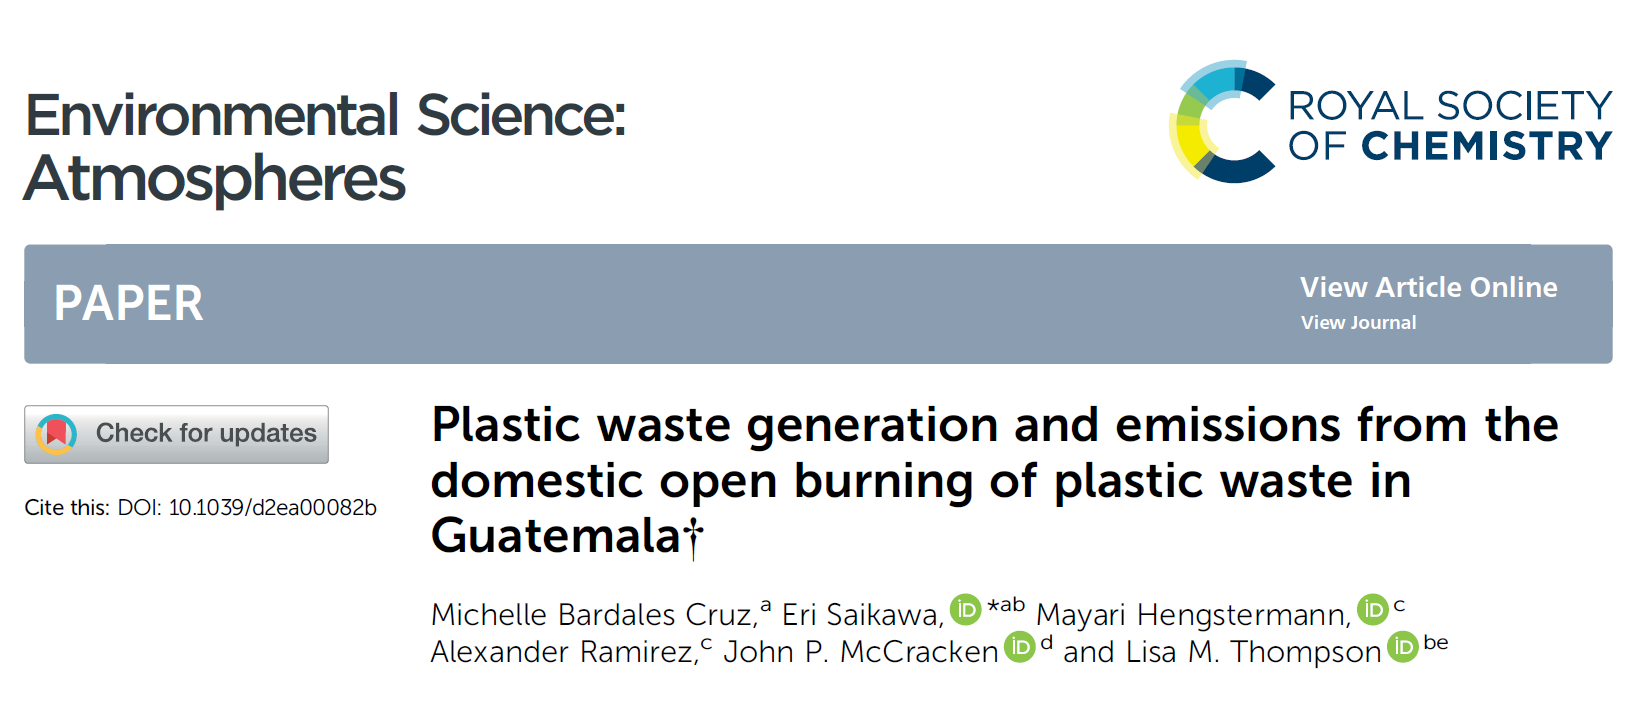 Plastic waste generation and emissions from the domestic open burning of plastic waste in Guatemala